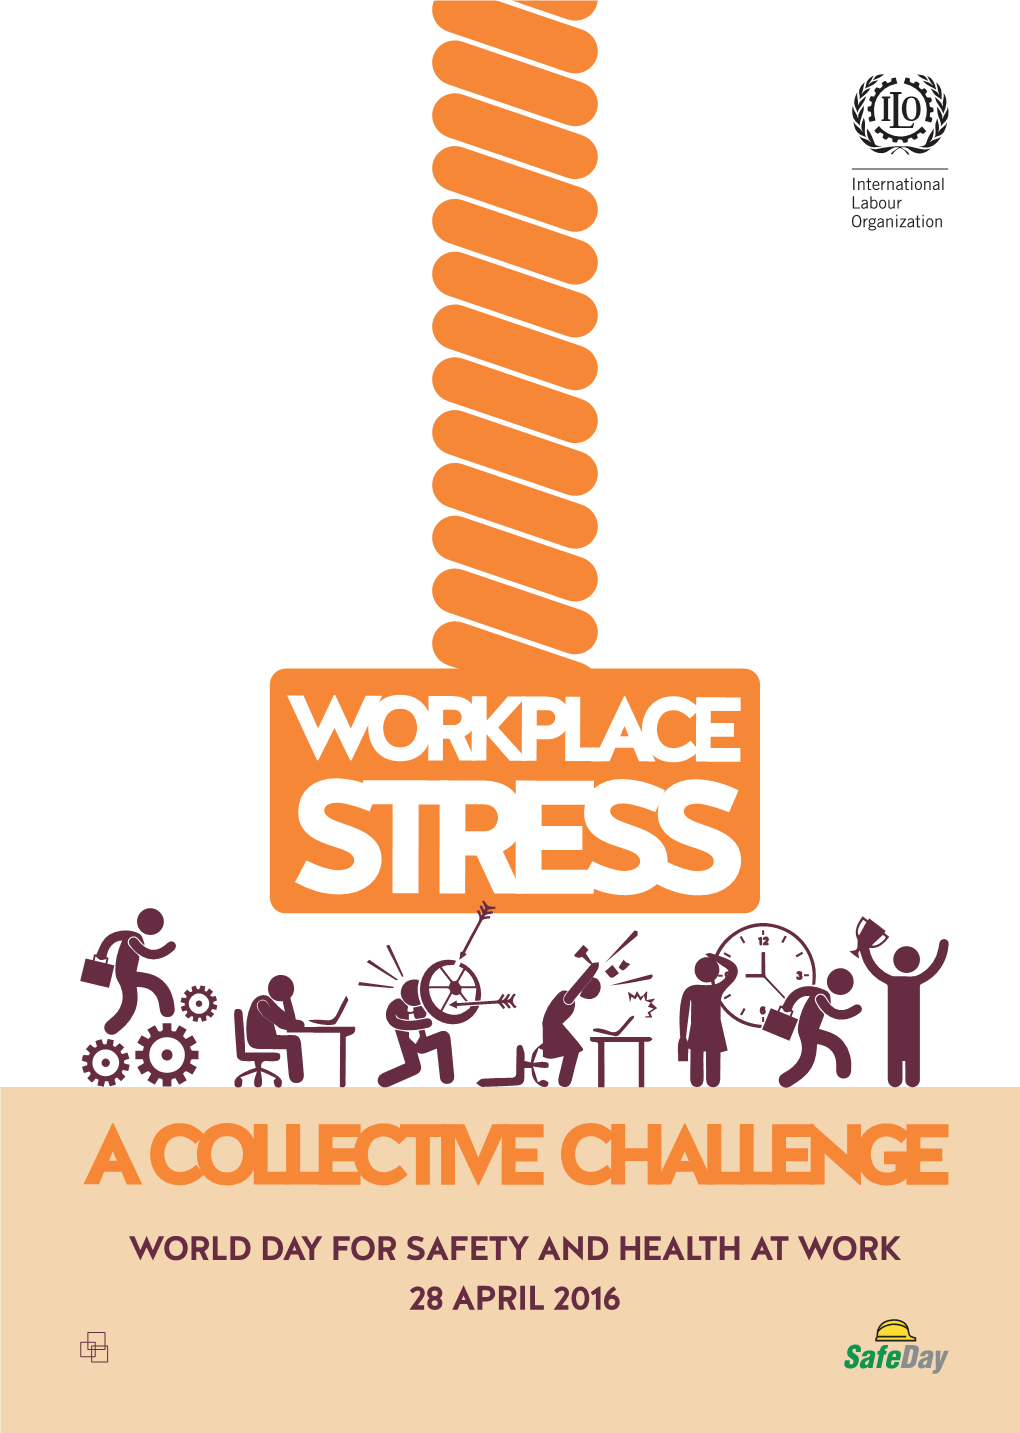 WORKPLACE STRESS: a Collective Challenge